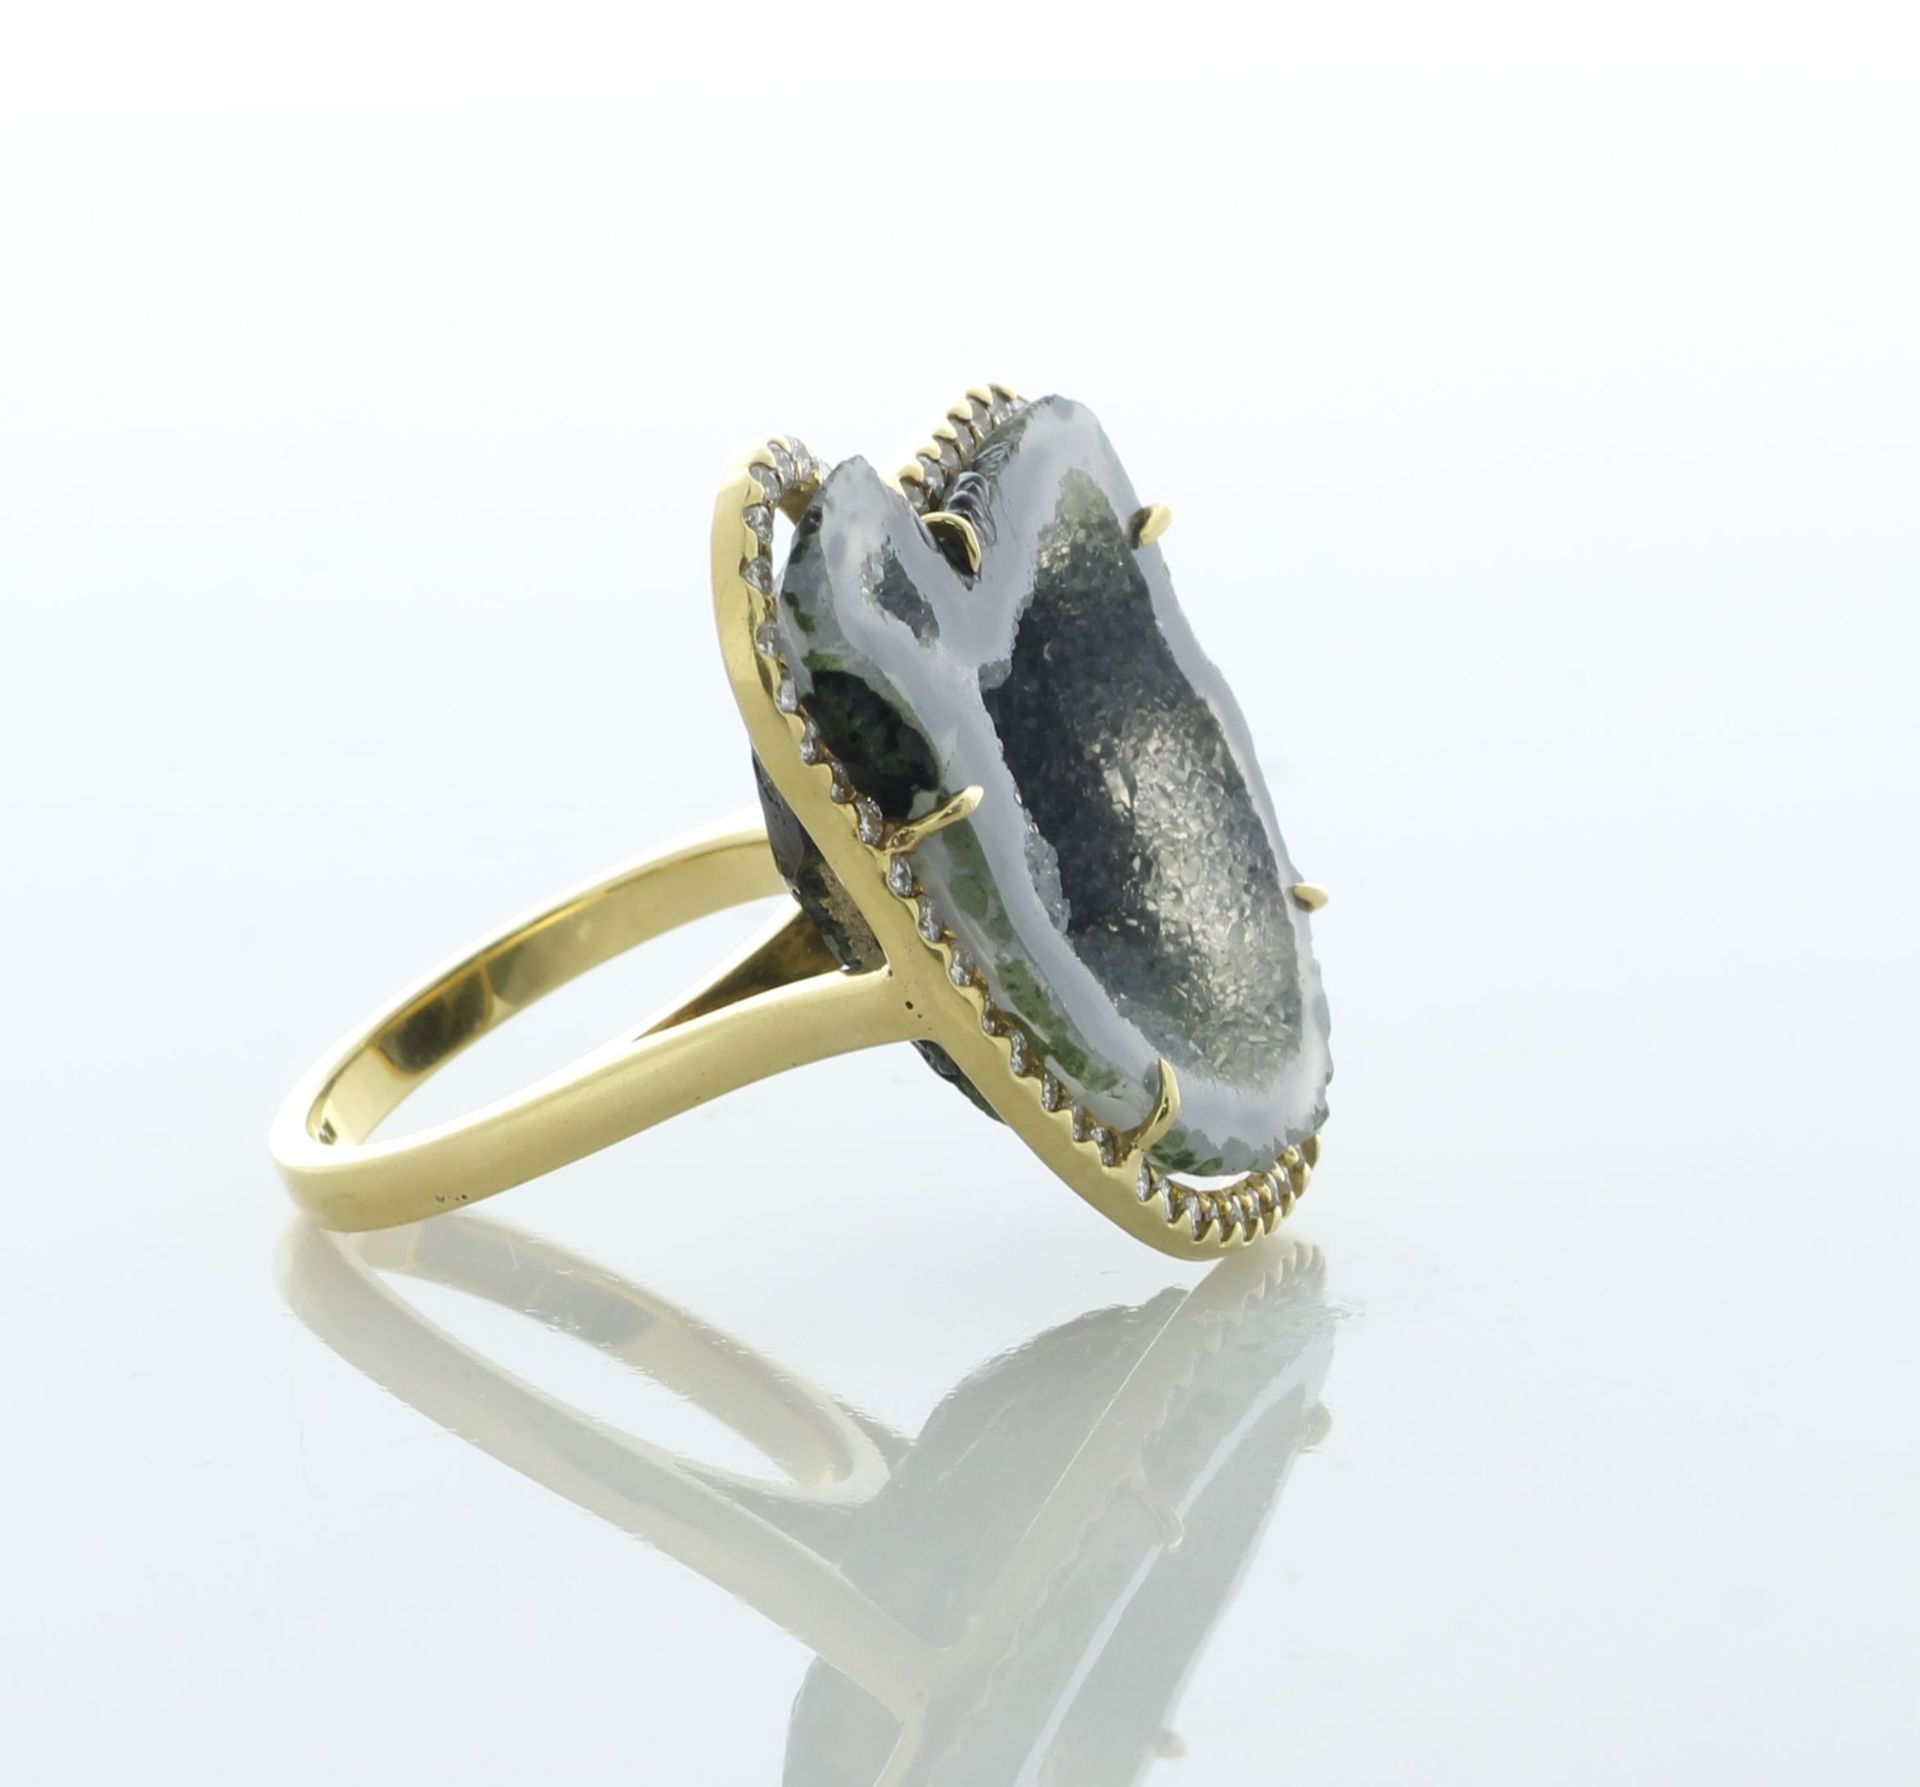 18ct Yellow Gold Diamond And Fossil Ring 0.60 Carats - Valued By AGI £7,560.00 - A stunning green/ - Image 2 of 5